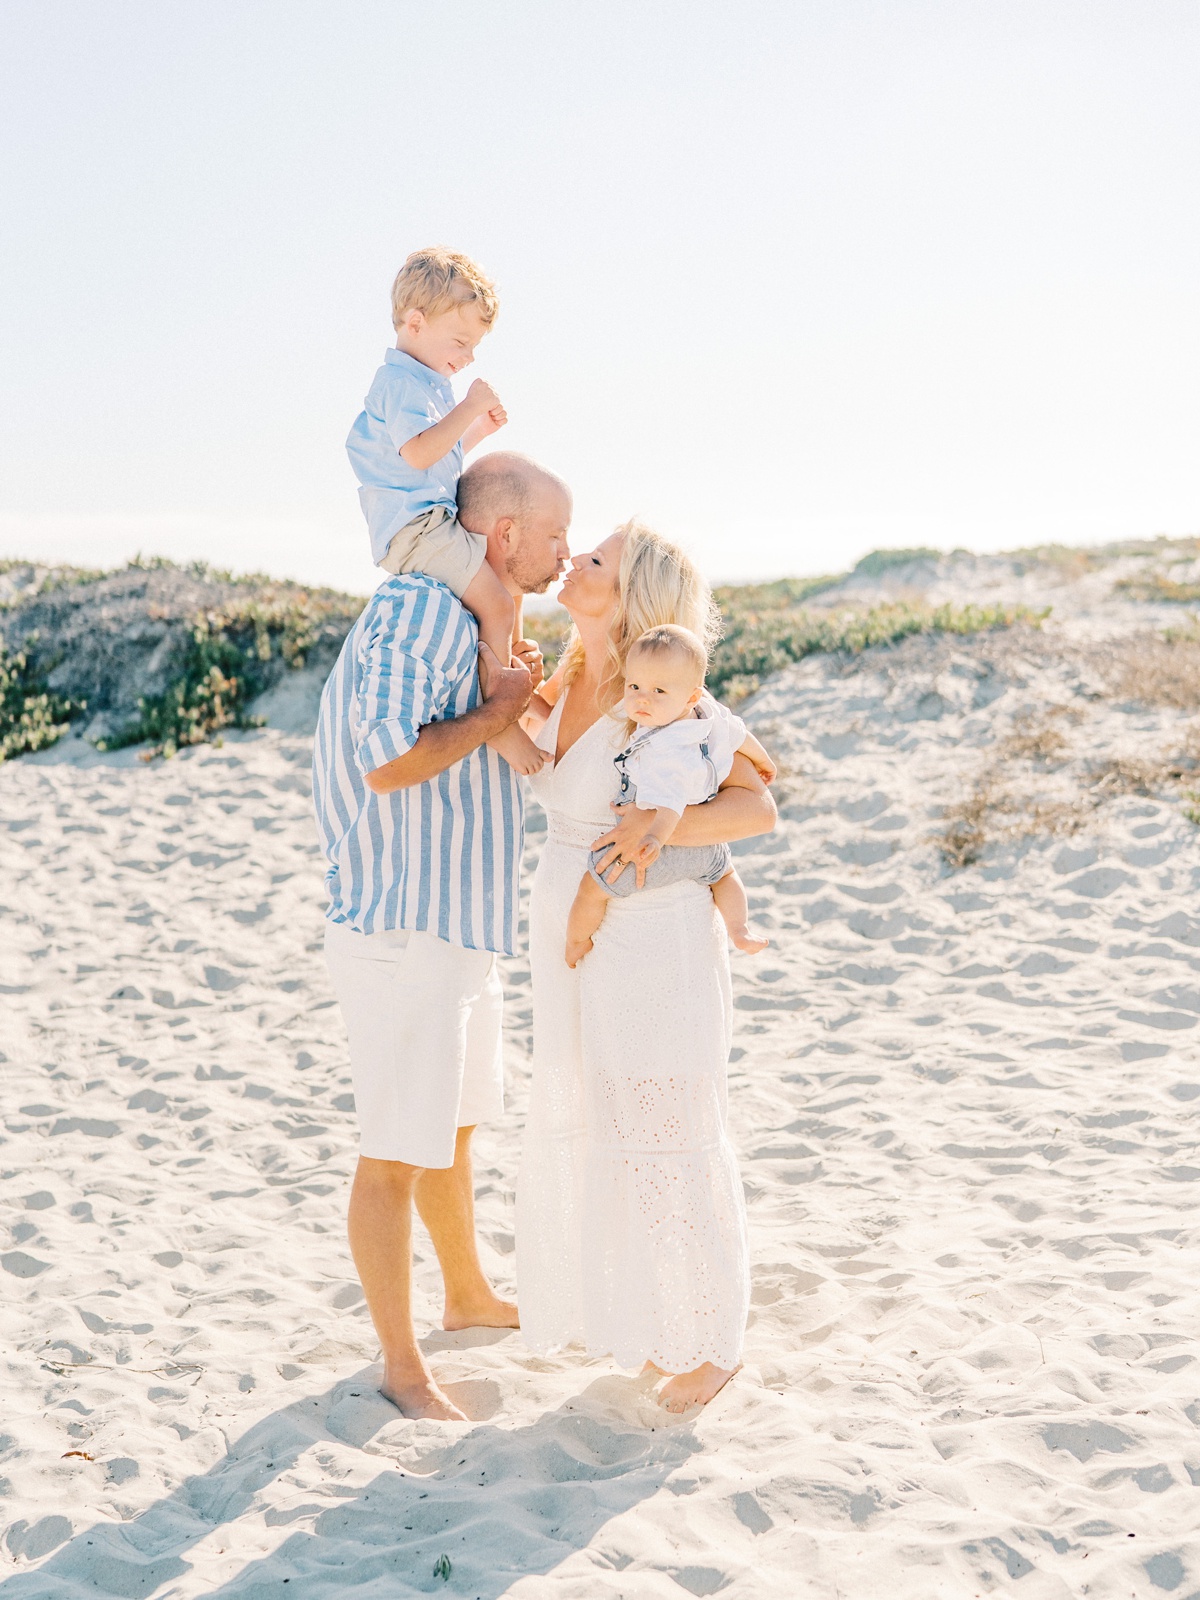 Outfit inspiration for beach family photos